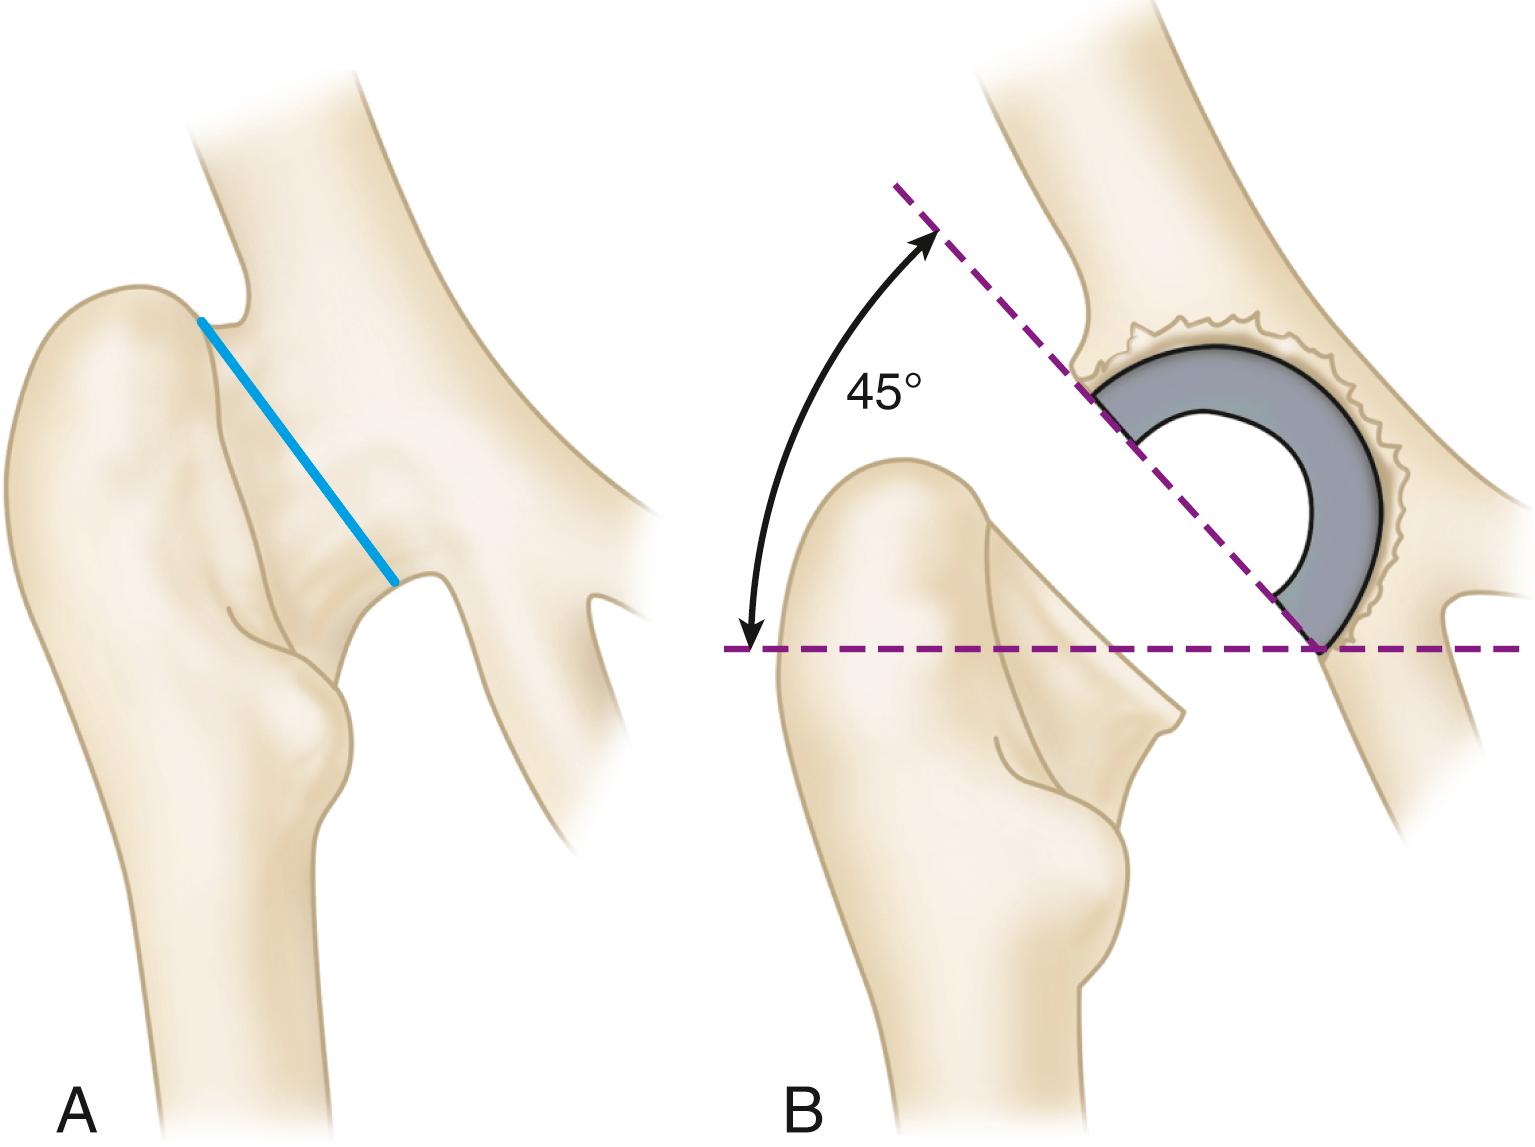 FIGURE 3.102, Osteotomy of neck in conversion of fusion to total hip arthroplasty. A, Neck usually is short and should be osteotomized proximally at base of trochanter. B, Sufficient bone is left on pelvic side for full coverage of cup at inclination of approximately 45 degrees and without penetrating medial cortex of pelvis.